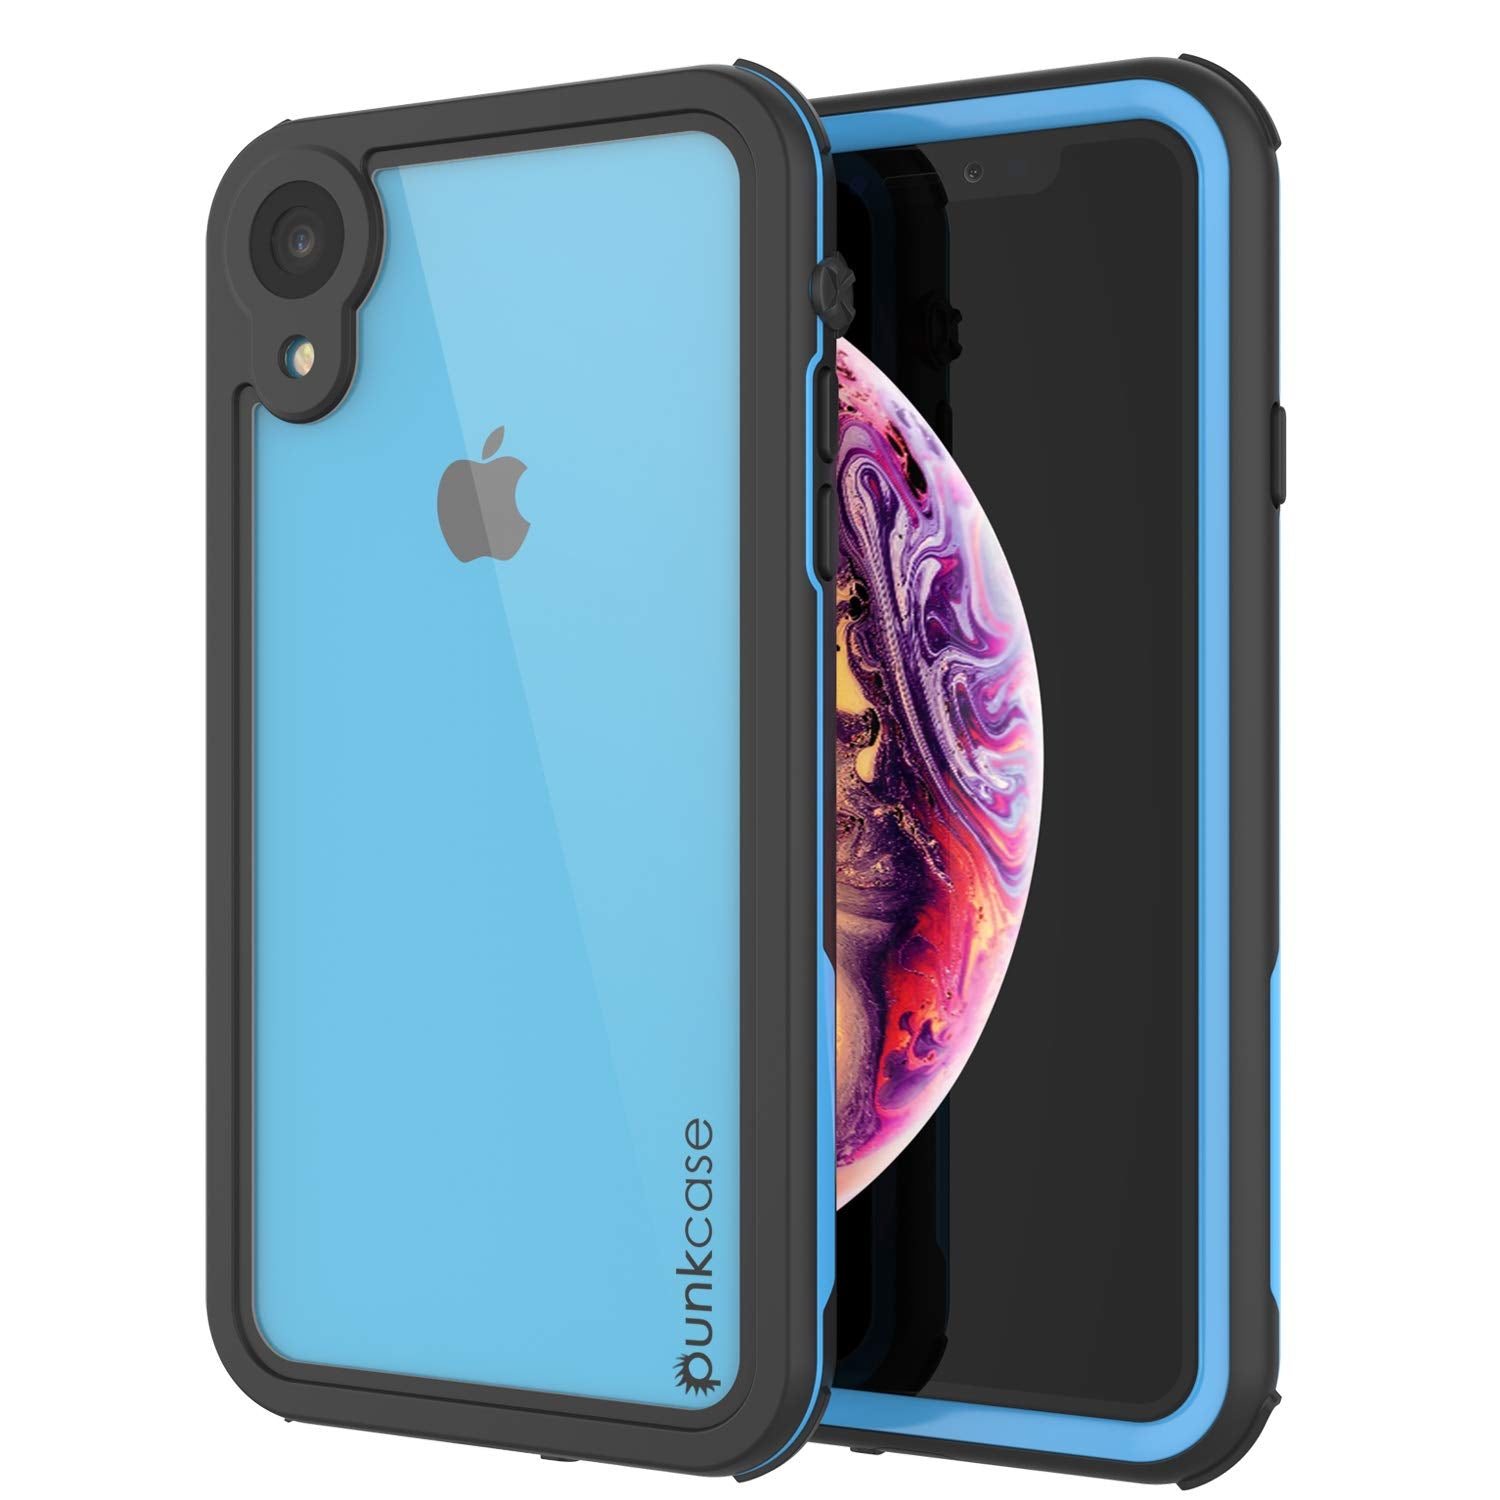 Apple iPhone XR Case, Full-Body Protective iPhone XR Waterproof Case,  Shockproof Snowproof Clear Cover Case for iPhone XR (iPhone XR, Black)